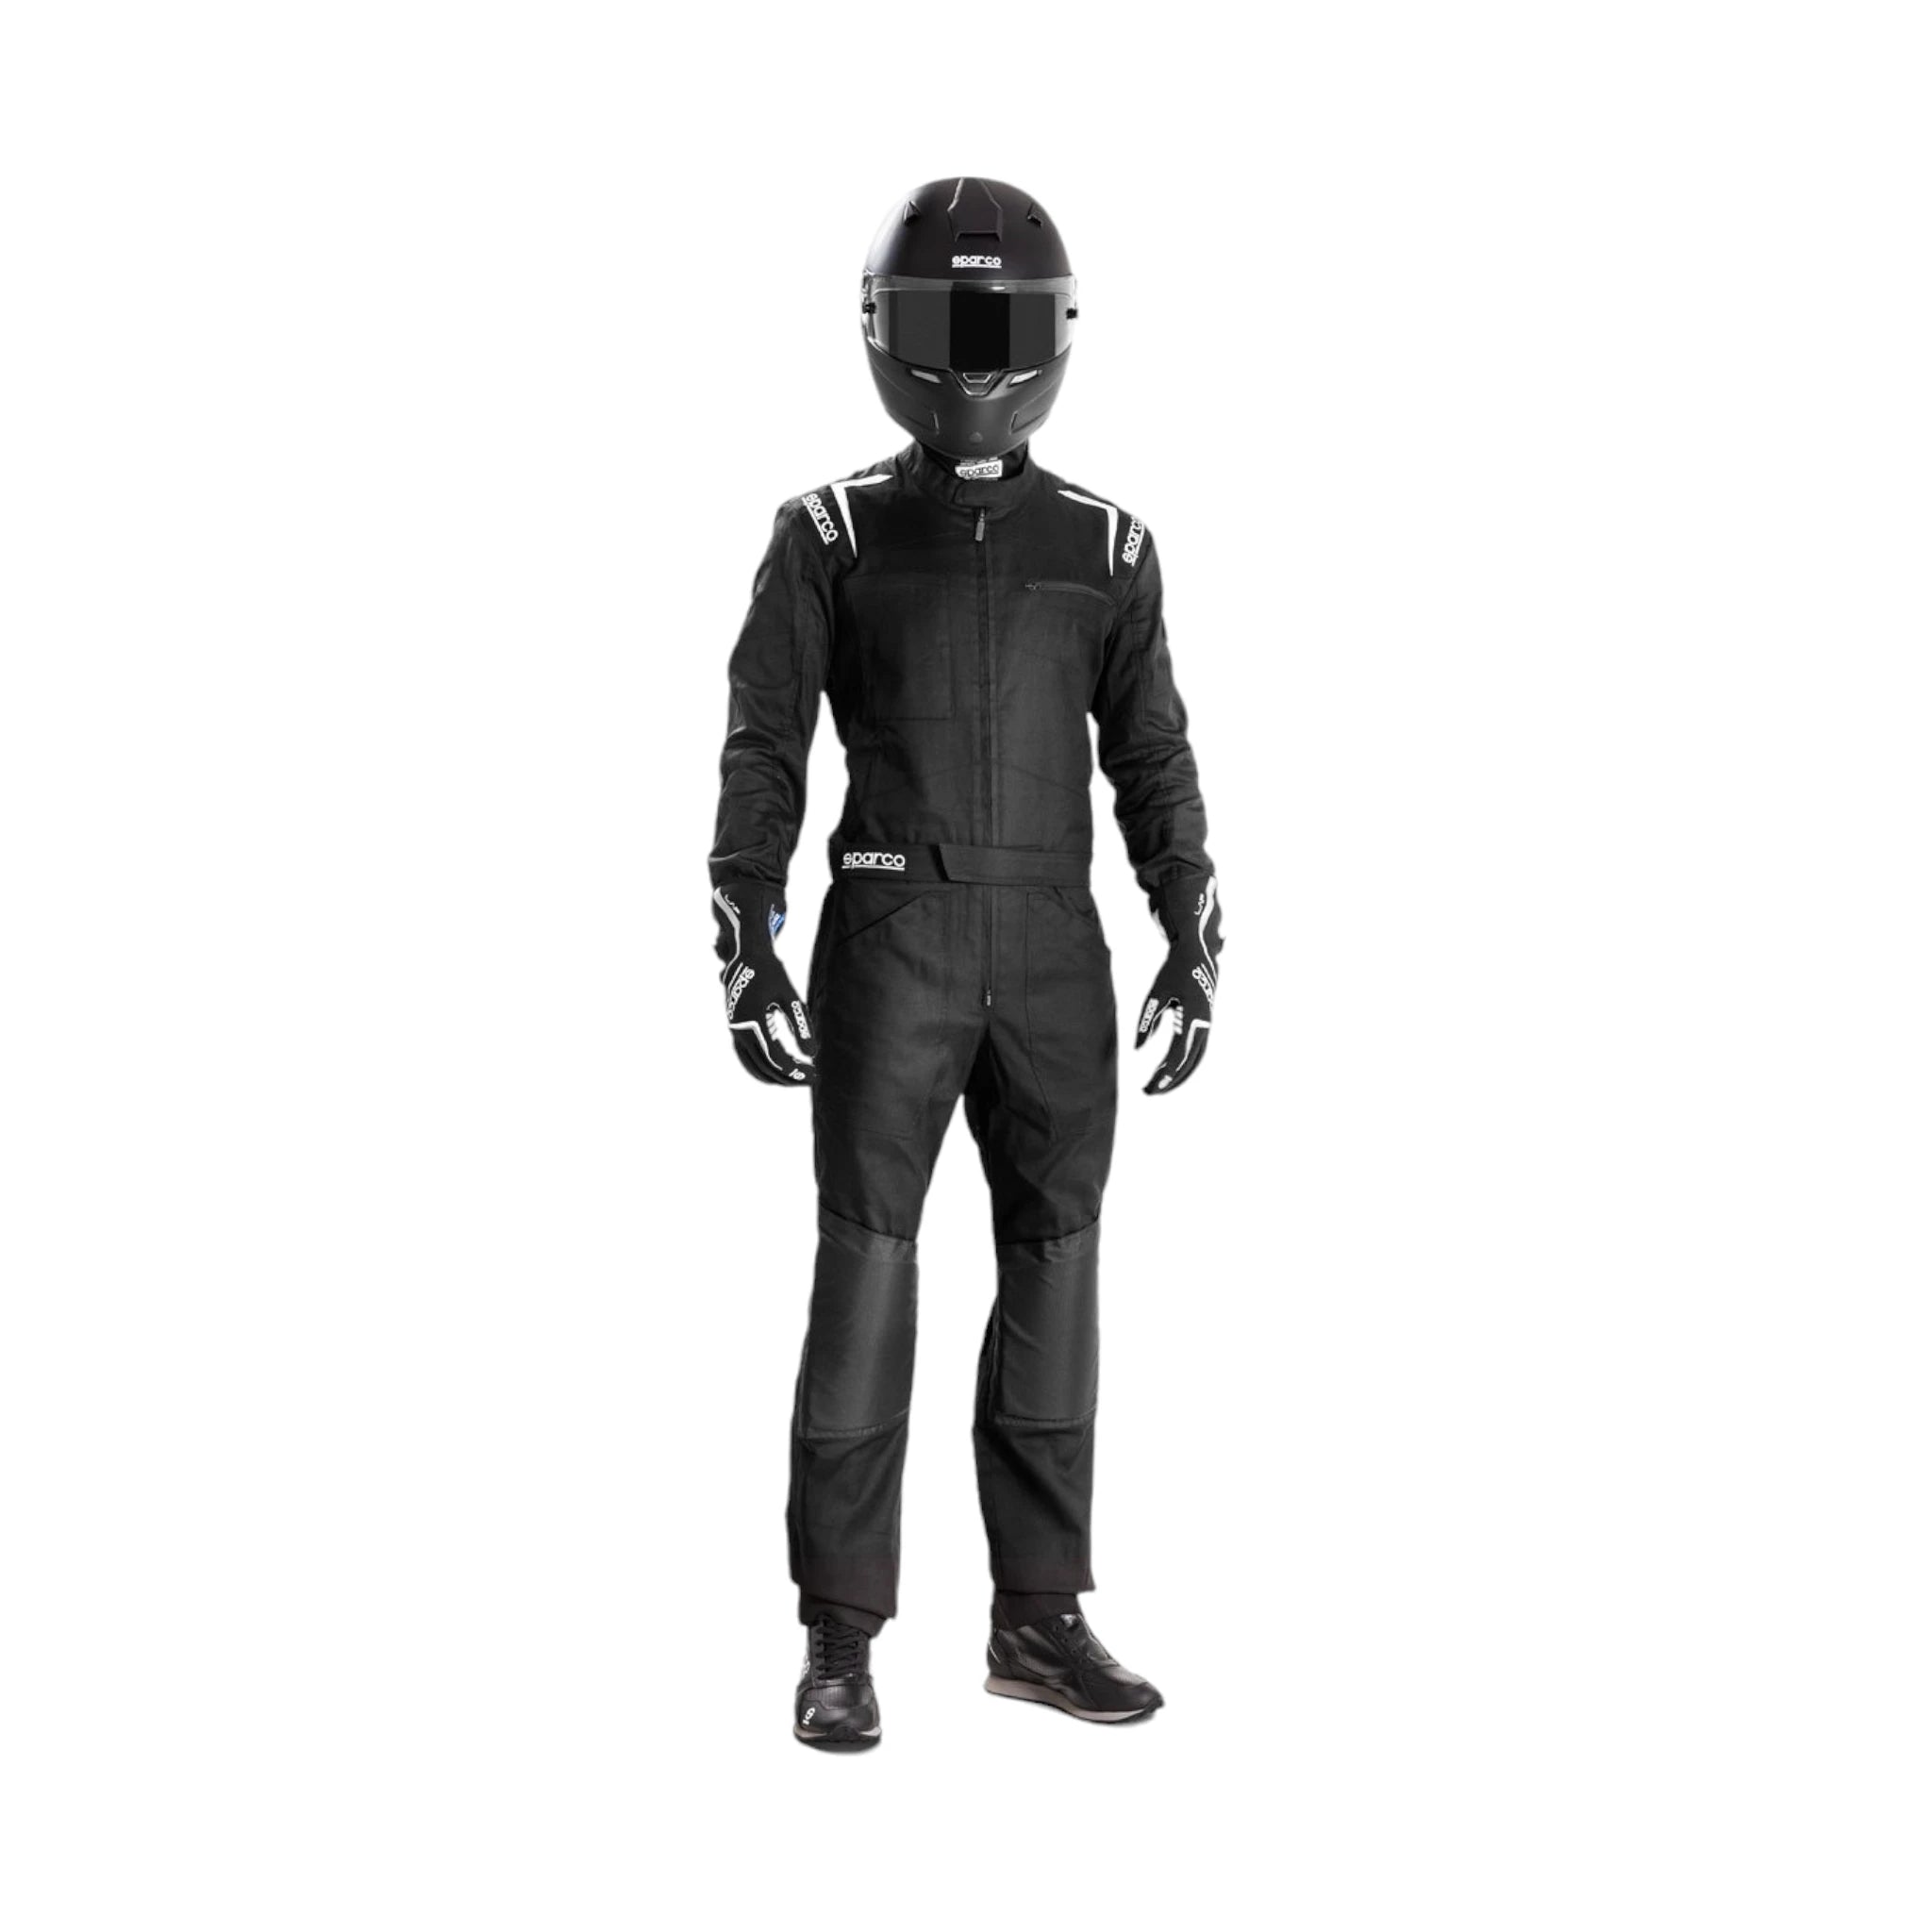 SPARCO COVERALL FOR MS-5 GREY MECHANICS